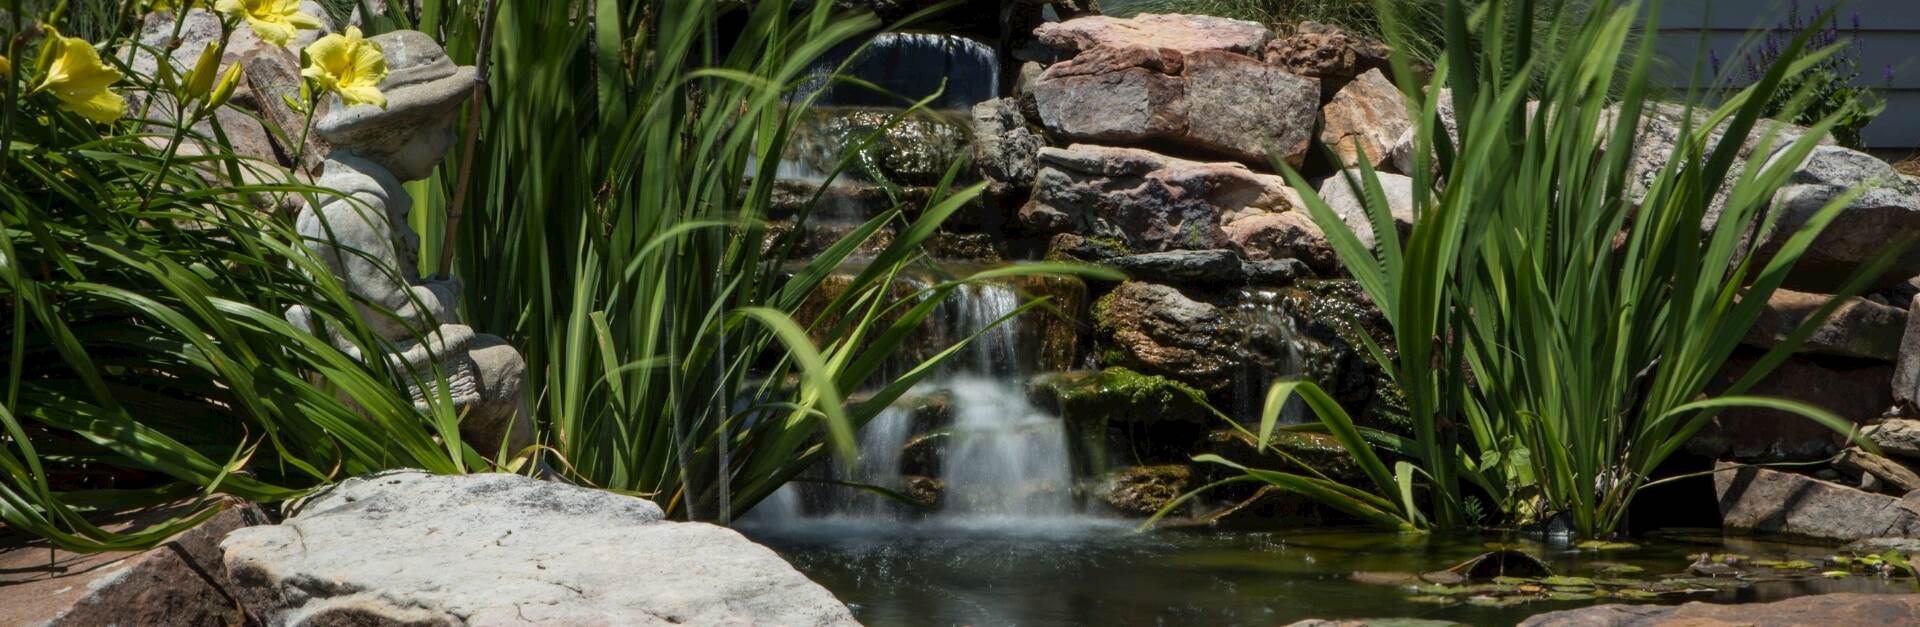 bubbling water feature pond with landscape rocks, green vegetation, and yellow daffodils